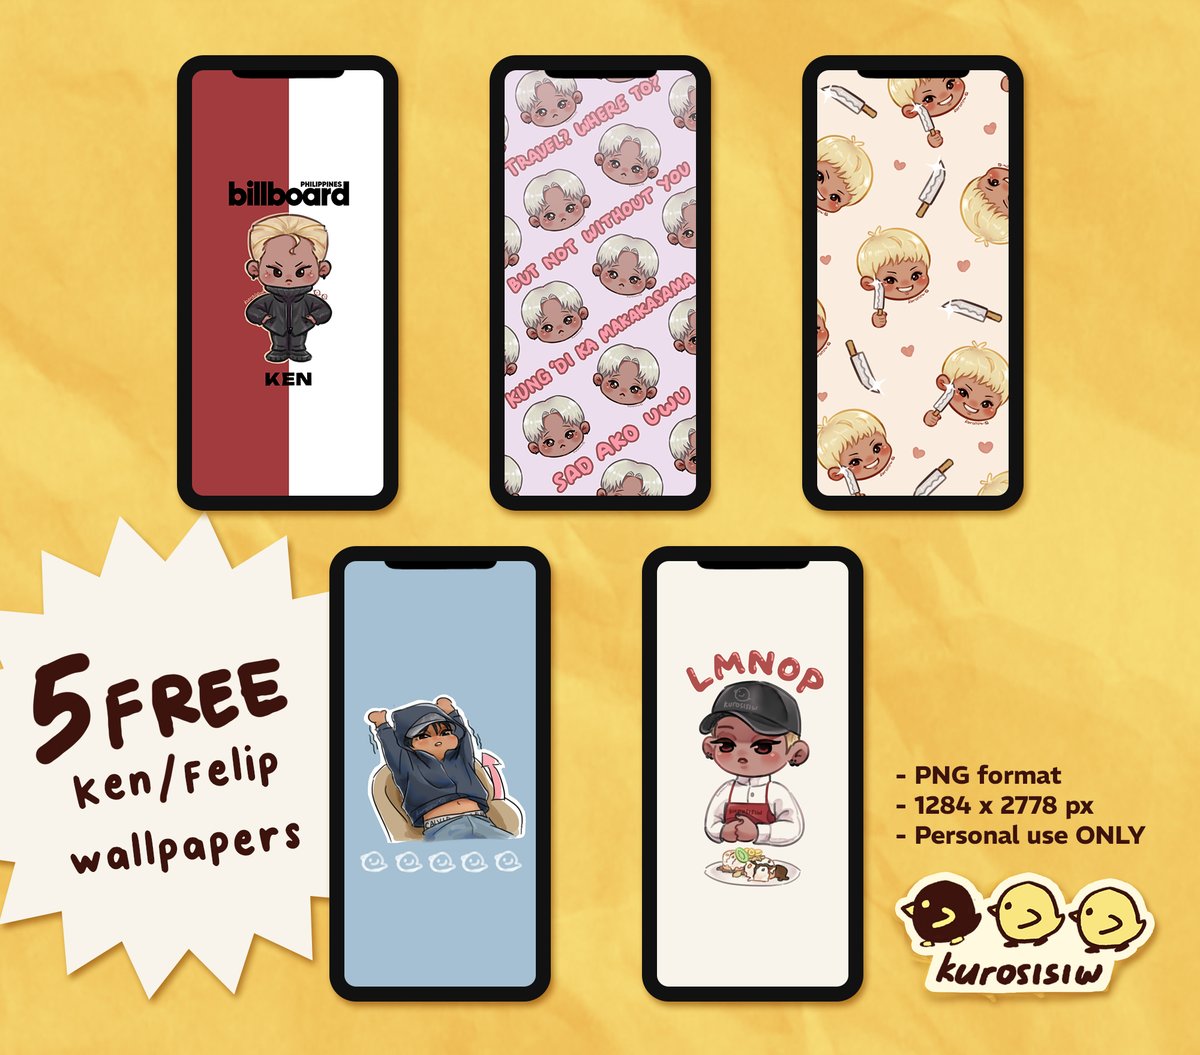 Hi I just launched my ko-fi page! 🐤🐤
Kape akala daw ☕️

I'll be putting wallpapers etc on my page, it's completely free :D

Releasing my first batch of Ken wallpapers for now!
You can get them here:
ko-fi.com/s/953413ee53

#SB19 #SB19_KEN #KofiChallenge